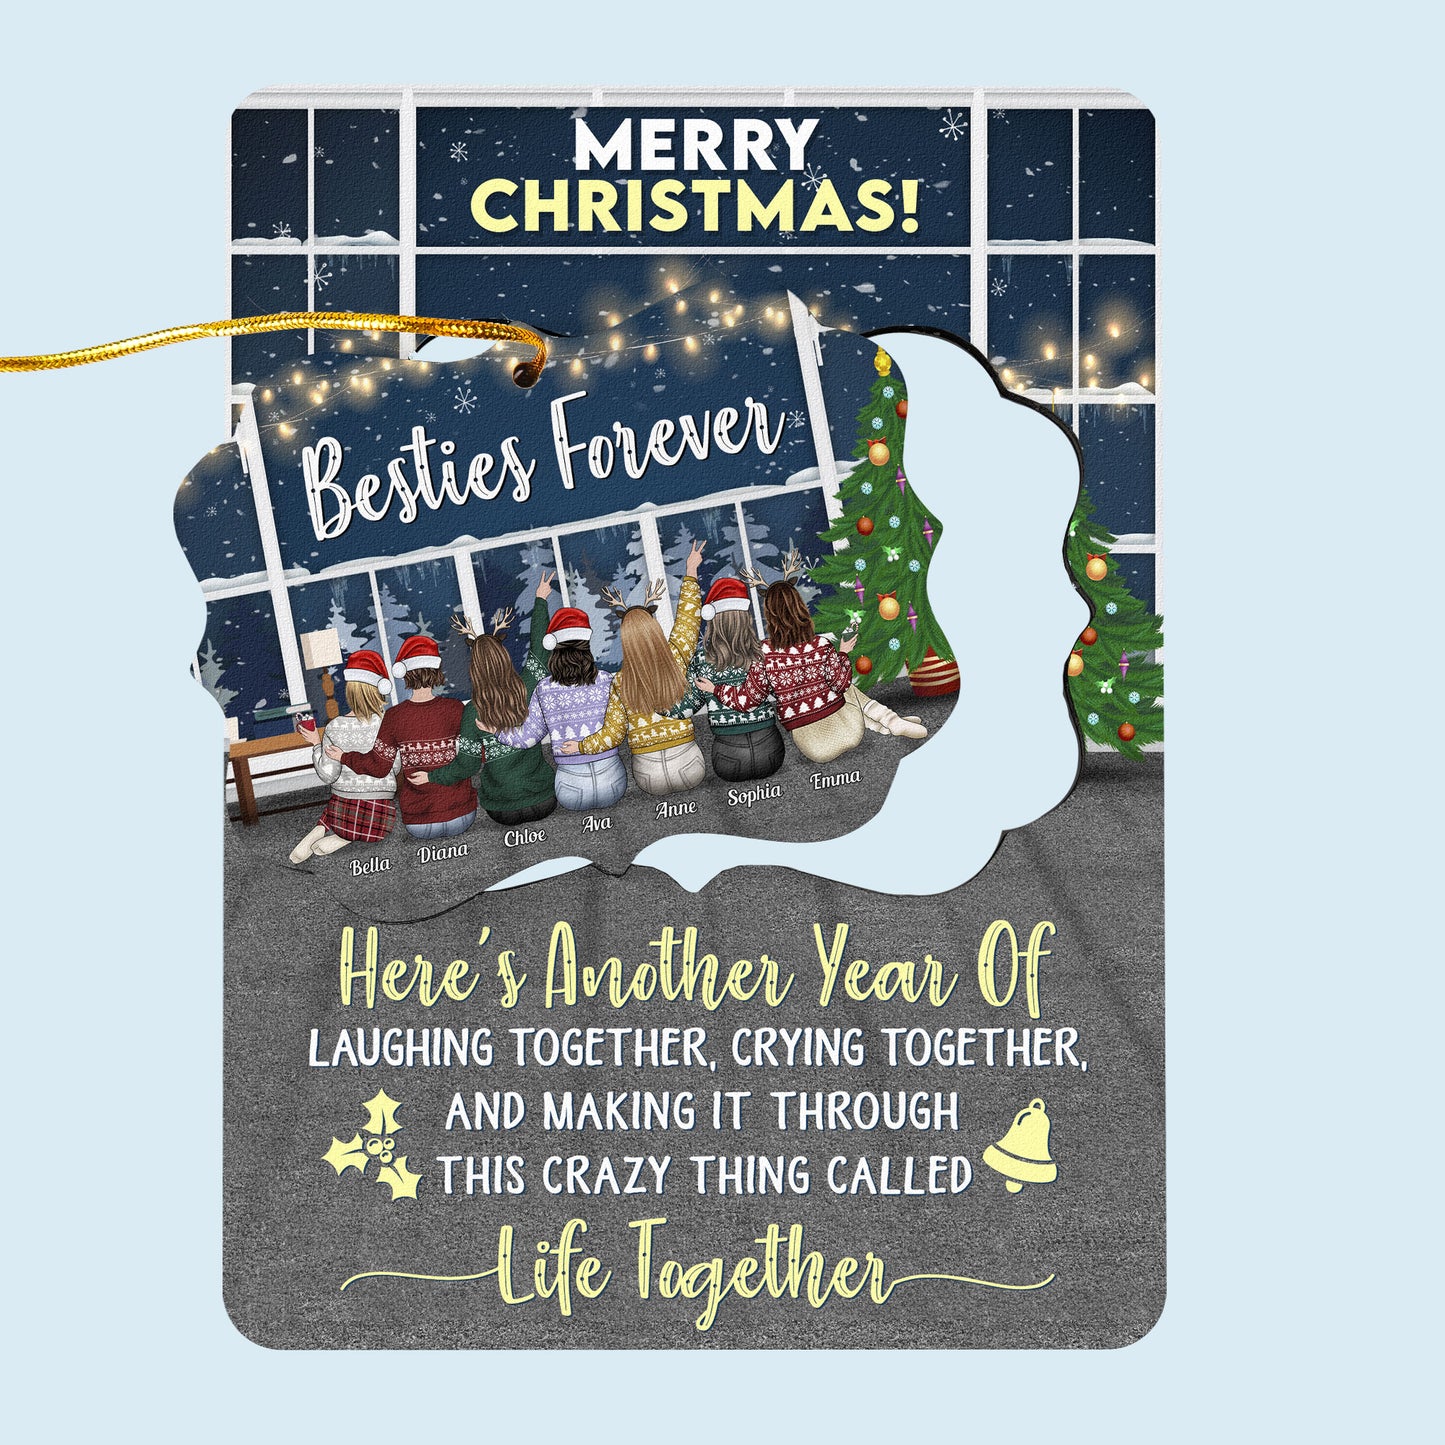 Besties Forever - Here's To Another Year - Personalized Wooden Card With Pop Out Ornament - Christmas Gift For Besties, Friends, Sisters, BFFs